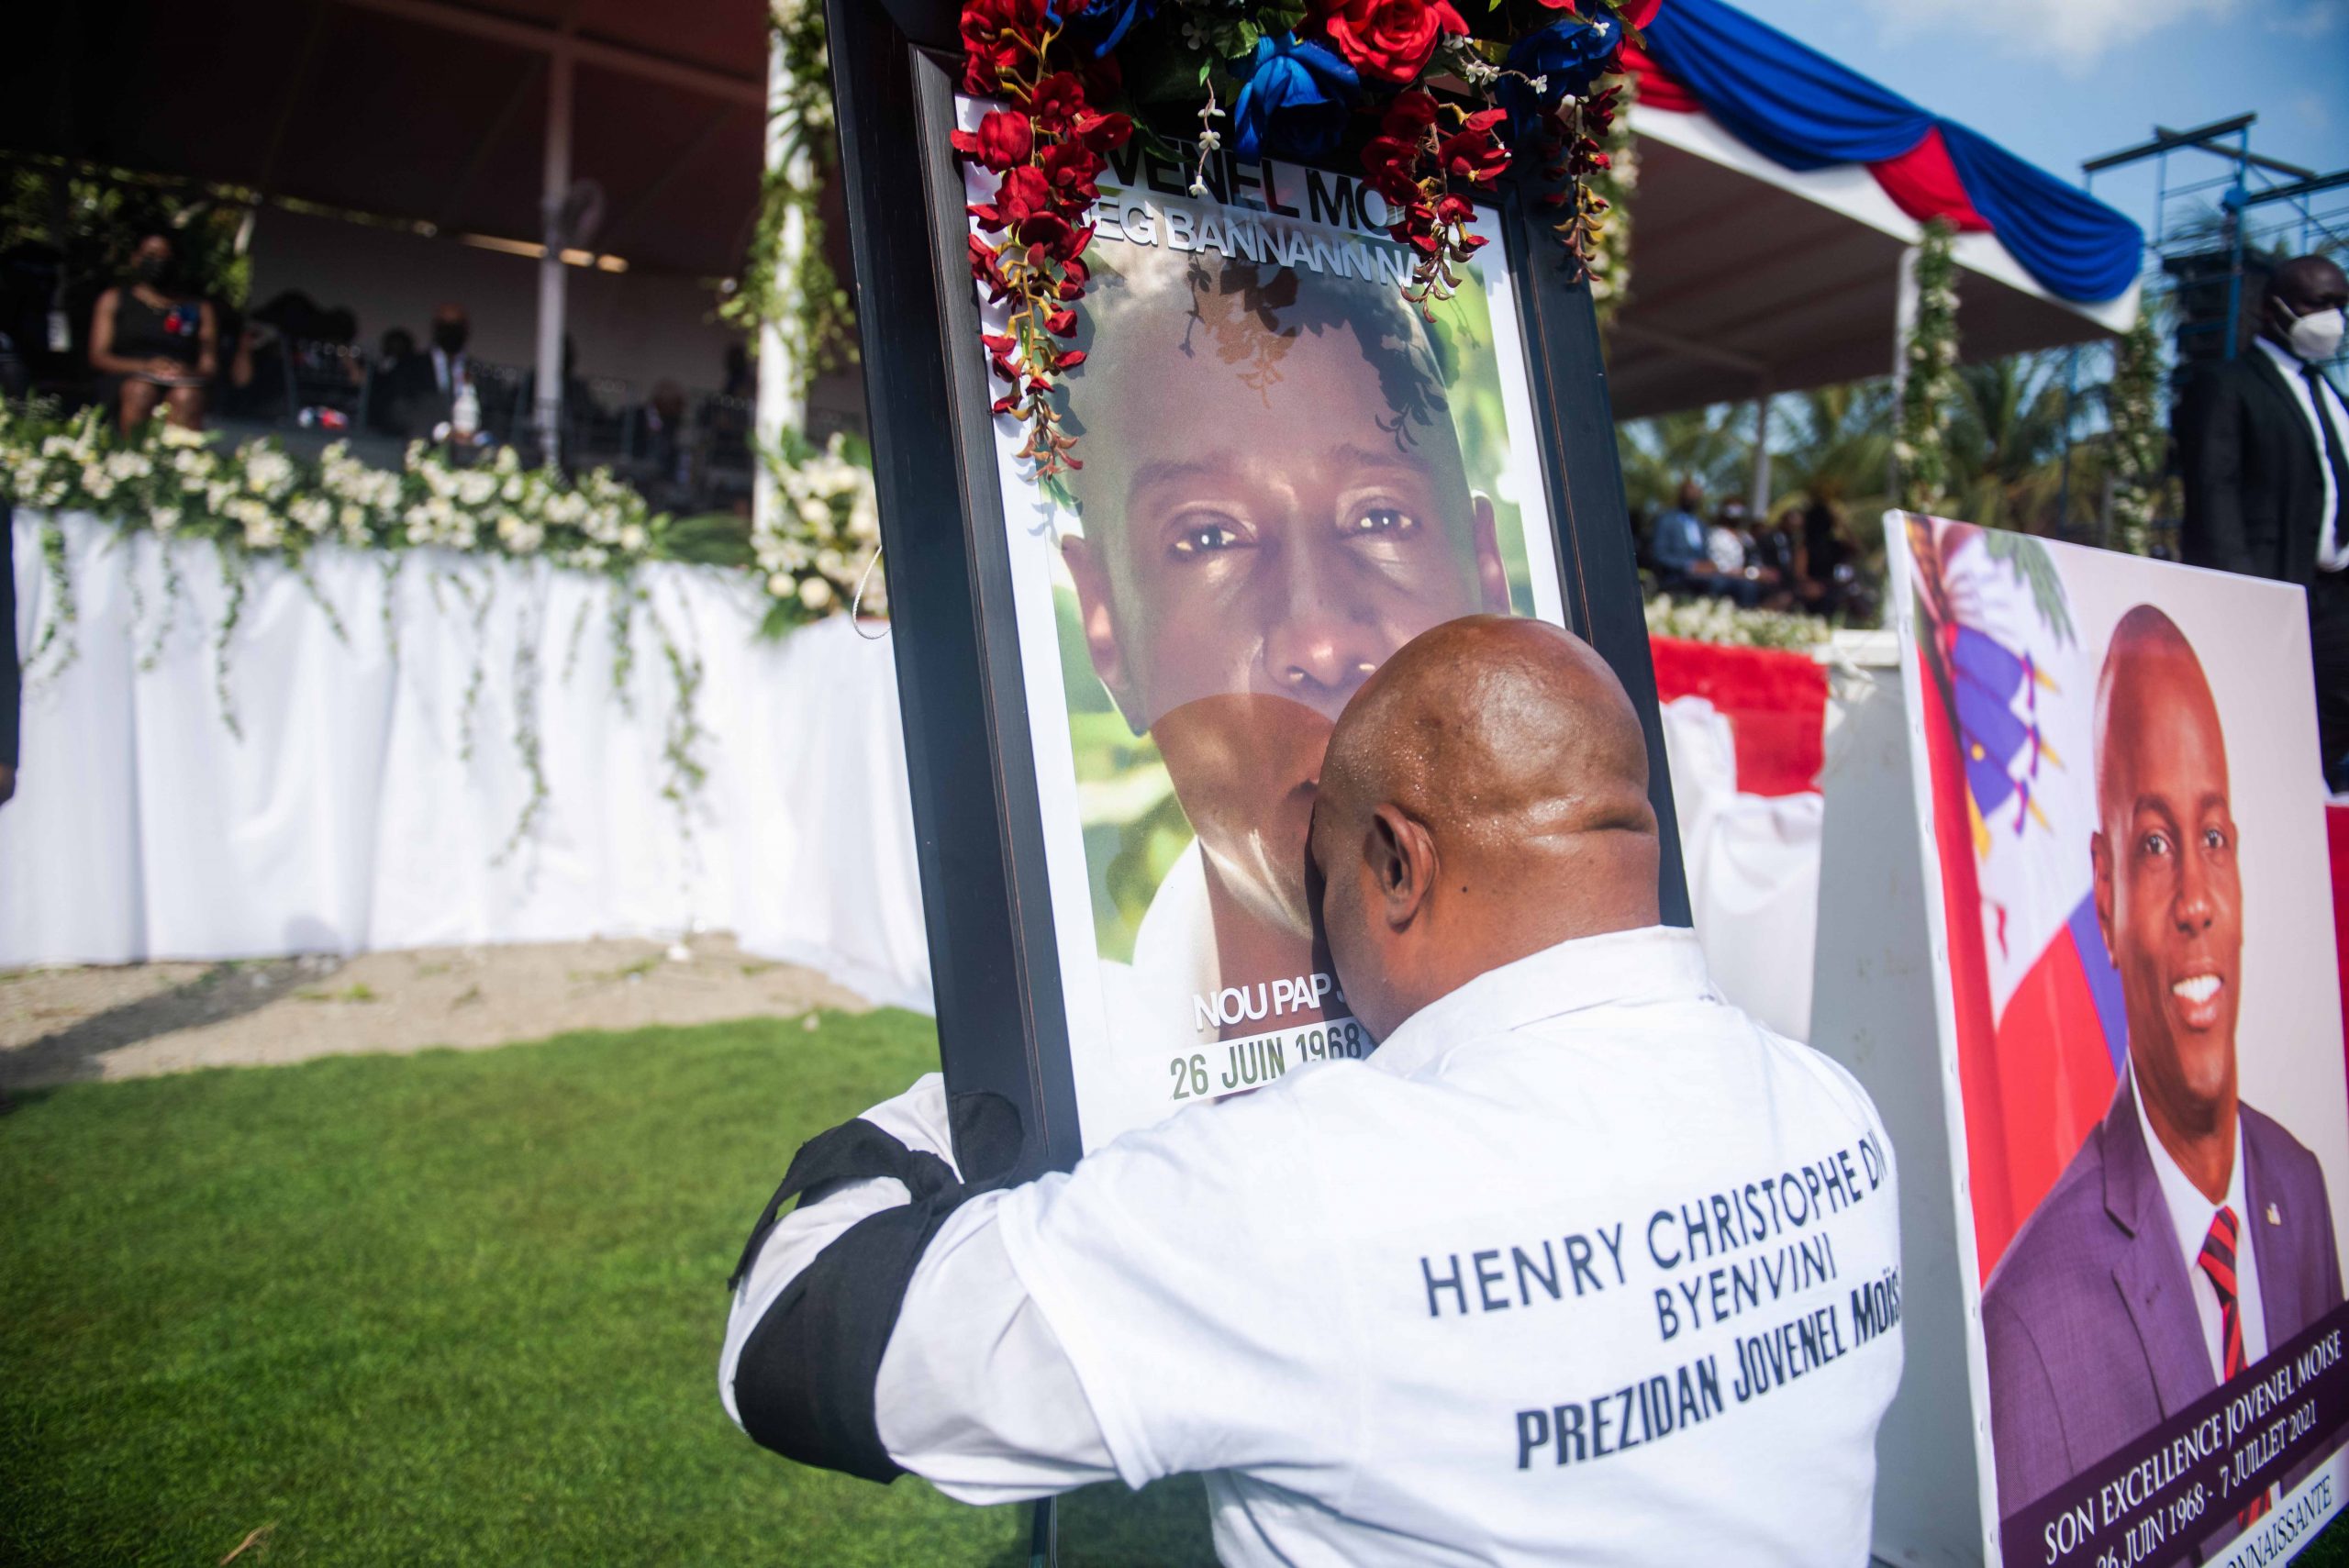 epa09360412 A man embraces a photograph with the image of President Jovenel Moise during his funeral ceremony in Cap-Haitien, Haiti, 23 July 2021. The wake in honor of the president of Haiti, Jovenel Moise, began this Friday in the city of Cap-Haitien, in the north of the country, hours before the burial of the president, who was murdered on July 7, takes place. The funeral service began two hours behind schedule and takes place in the gardens of the Habitation Village SOS, the Moise family's private residence on the outskirts of Cap-Haitien, which is guarded by a strong security apparatus.  EPA/Jean Marc Hervé Abélard